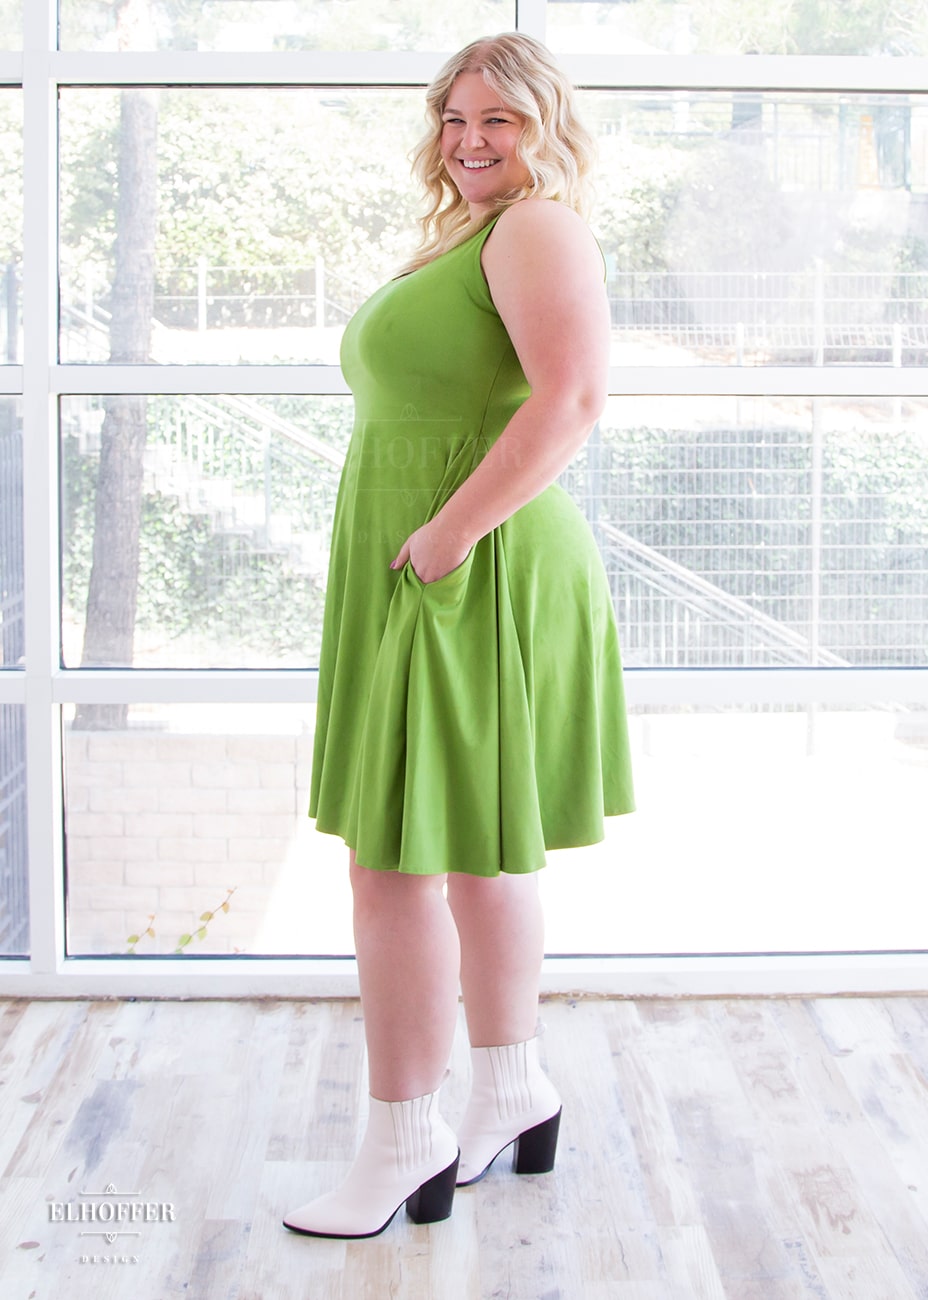 Sarah, a fair skinned size XL model with long blonde hair, wears a light green suede knee length dress with fitted torso and full skirt. She stands to the side and has her hand in the generous pocket.